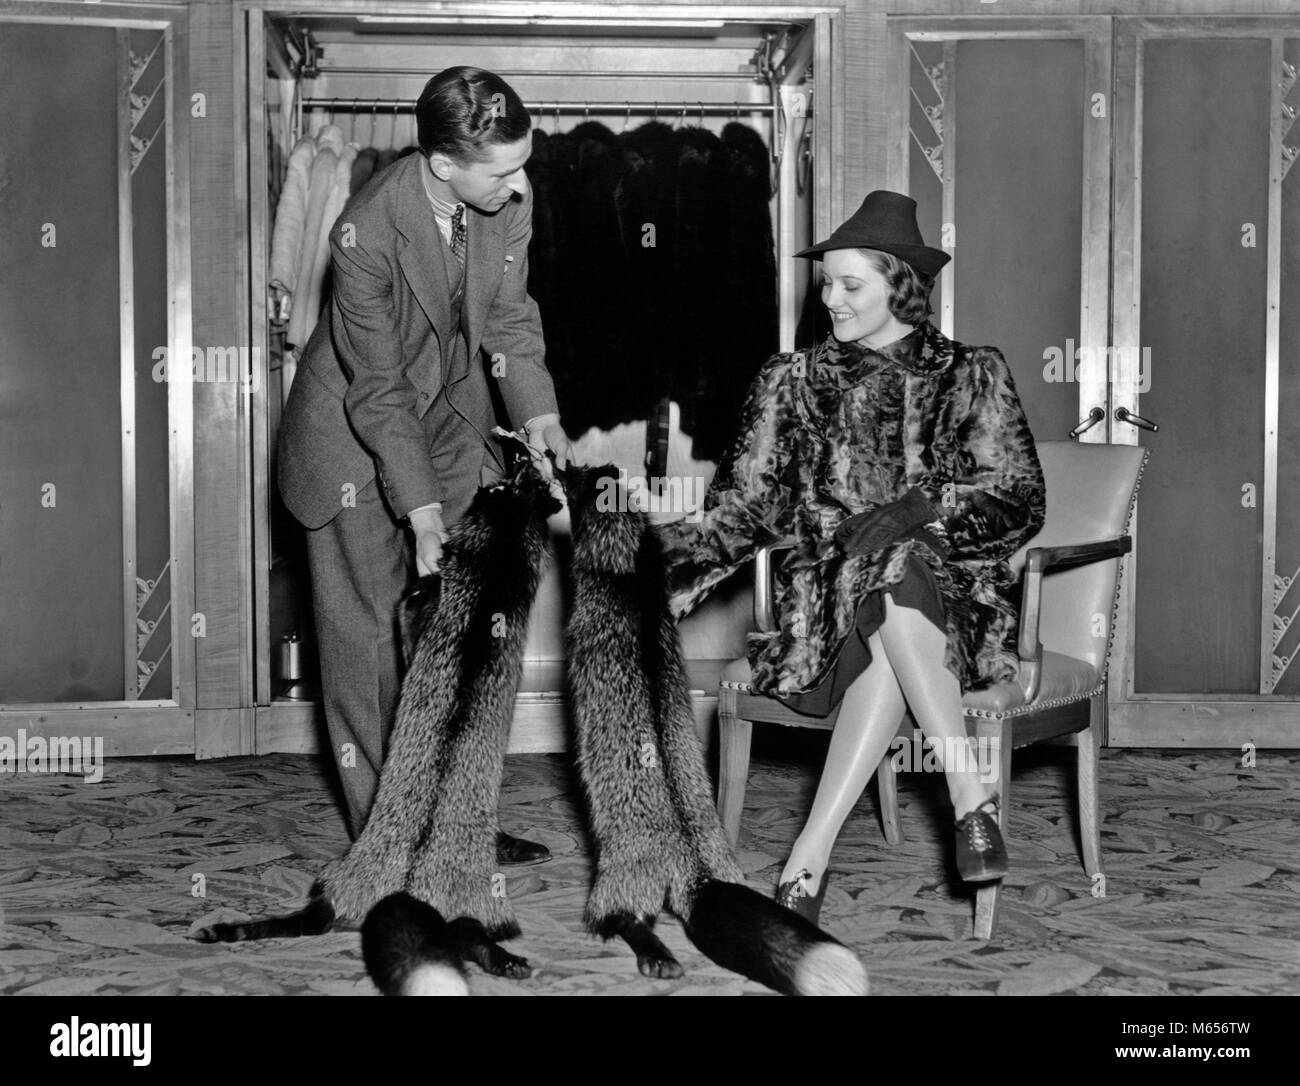 1930s WOMAN IN FUR SALON WEARING FUR COAT SITTING DOWN WHILE SALESMAN SHOWS HER FOX FUR STOLES - f8344 HAR001 HARS OLD TIME INDUSTRY OLD FASHION 1 STYLE SALON WEALTHY TWO PEOPLE CAUCASIAN RICH JOY LIFESTYLE SALESPERSON FEMALES JOBS RETAIL GROWNUP LUXURY FULL-LENGTH INSPIRATION GROWN-UP FOX ANIMALS COUPLES INDOORS PAIRS NOSTALGIA MEN AND WOMEN 25-30 YEARS 30-35 YEARS PEOPLE STORY OCCUPATION SELLING HAPPINESS LEISURE STYLES CUSTOMER SERVICE CHOICE EXCITEMENT PRIDE RELATIONSHIPS STOLE FASHIONS CONSUMER PELT PELTS MERCHANTS SALESMEN SALES PERSON FURS HUNTRESS MERCHANDISING MERCHANT MID-ADULT Stock Photo